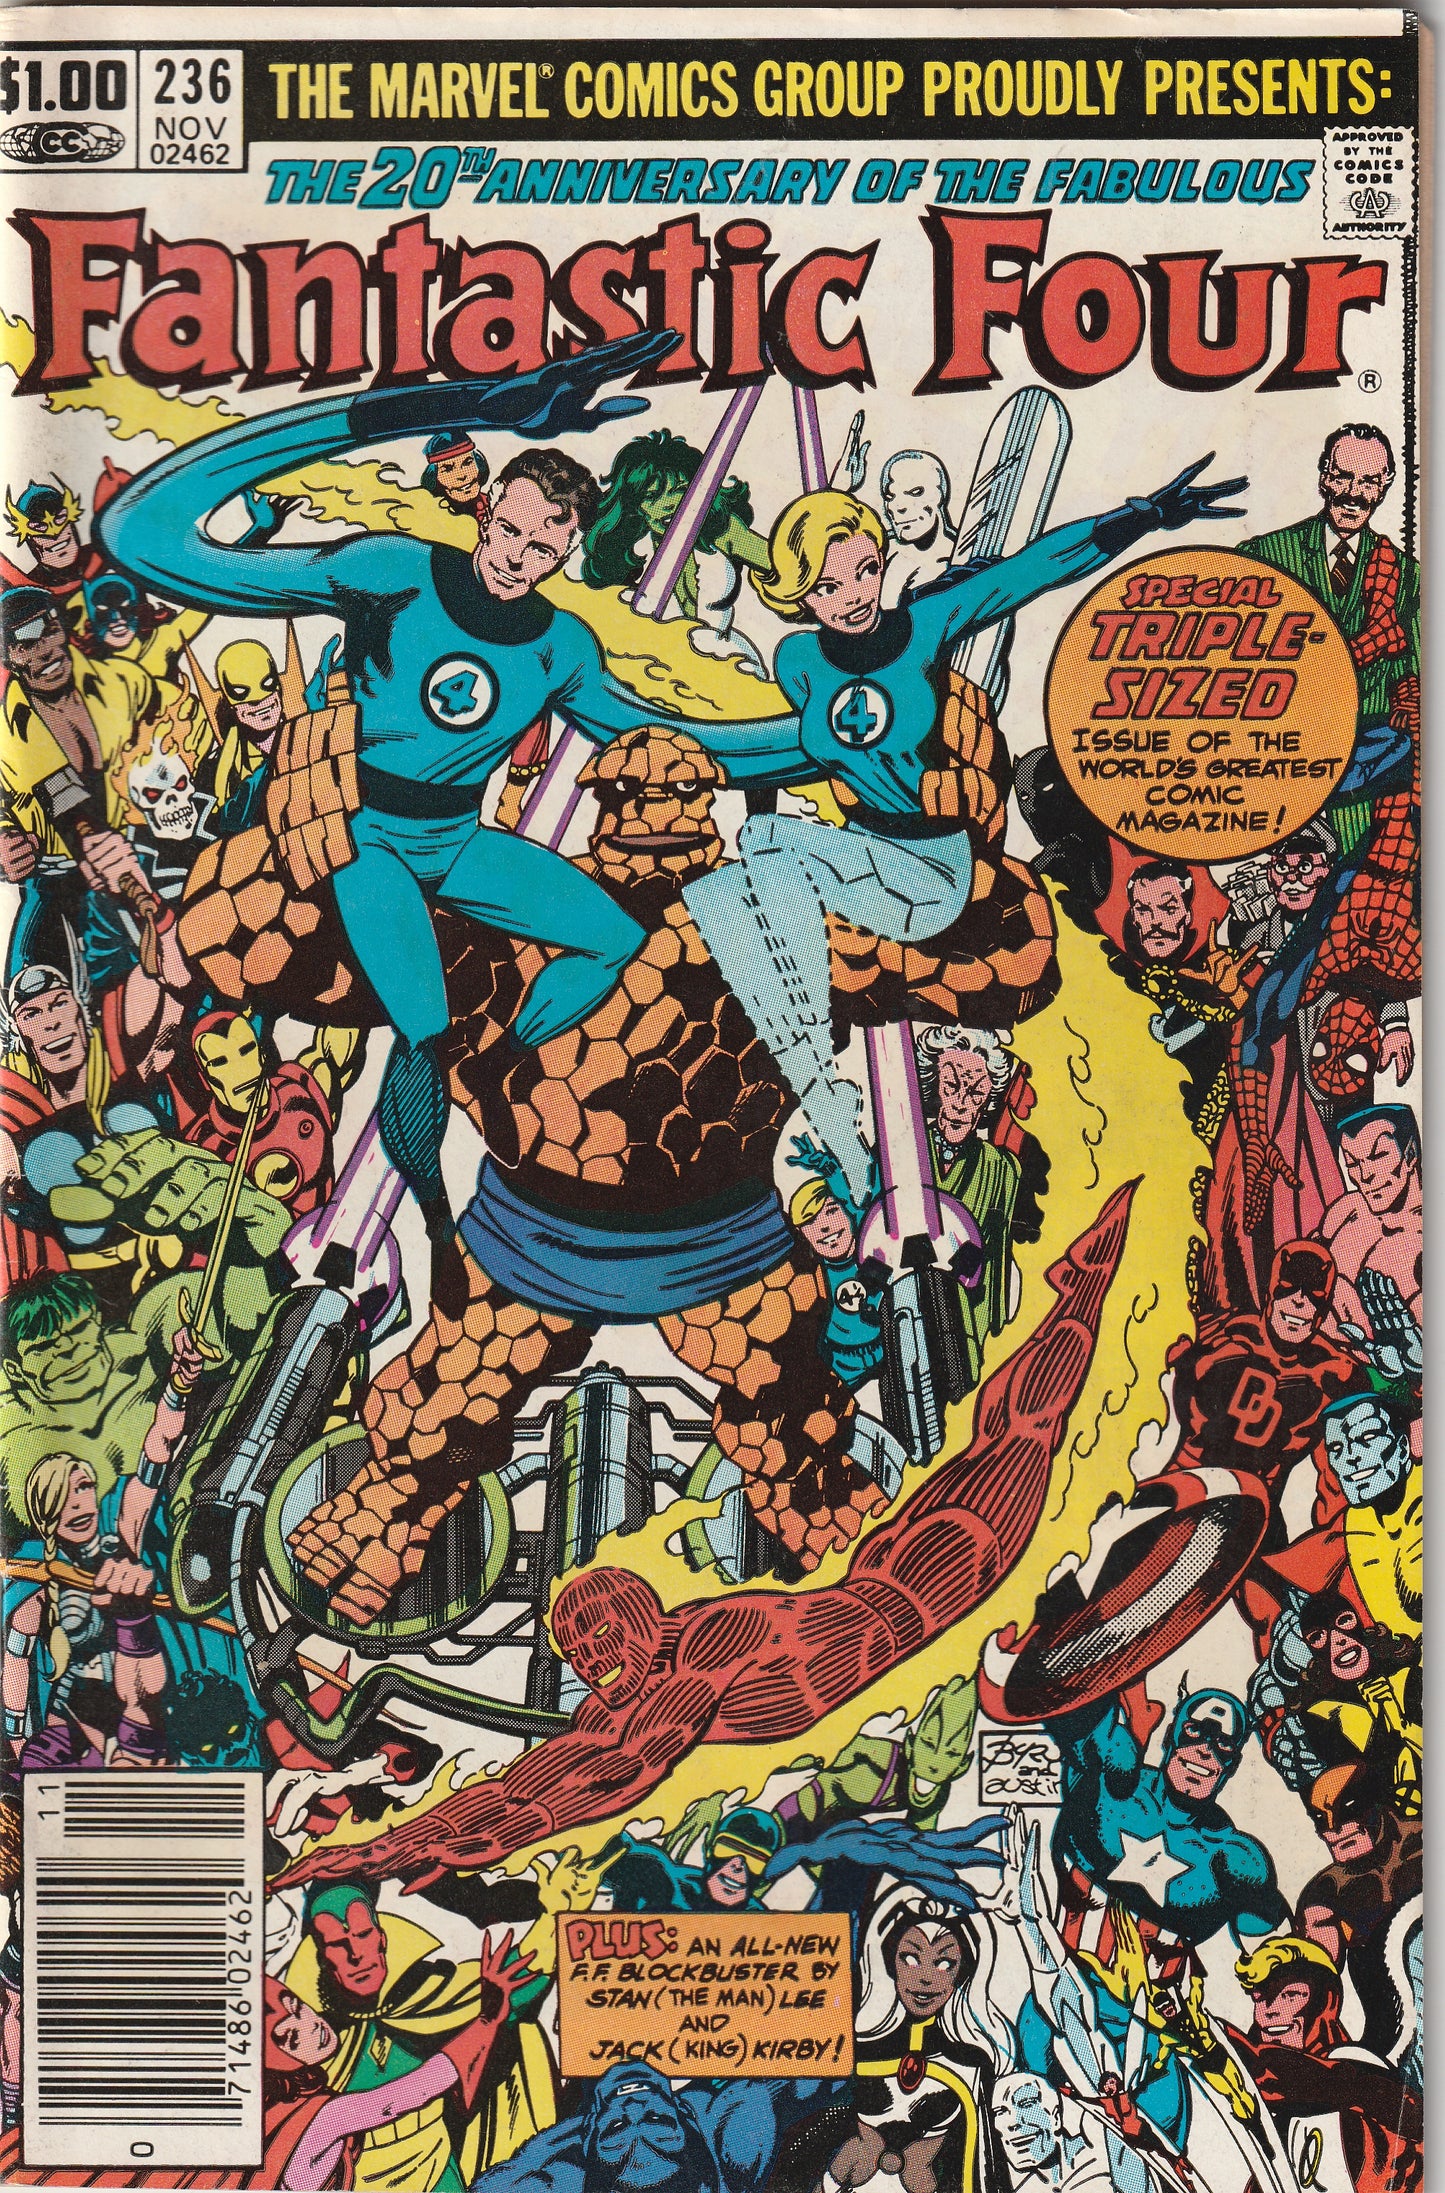 Fantastic Four #236 (1981) - 20th Anniversary issue